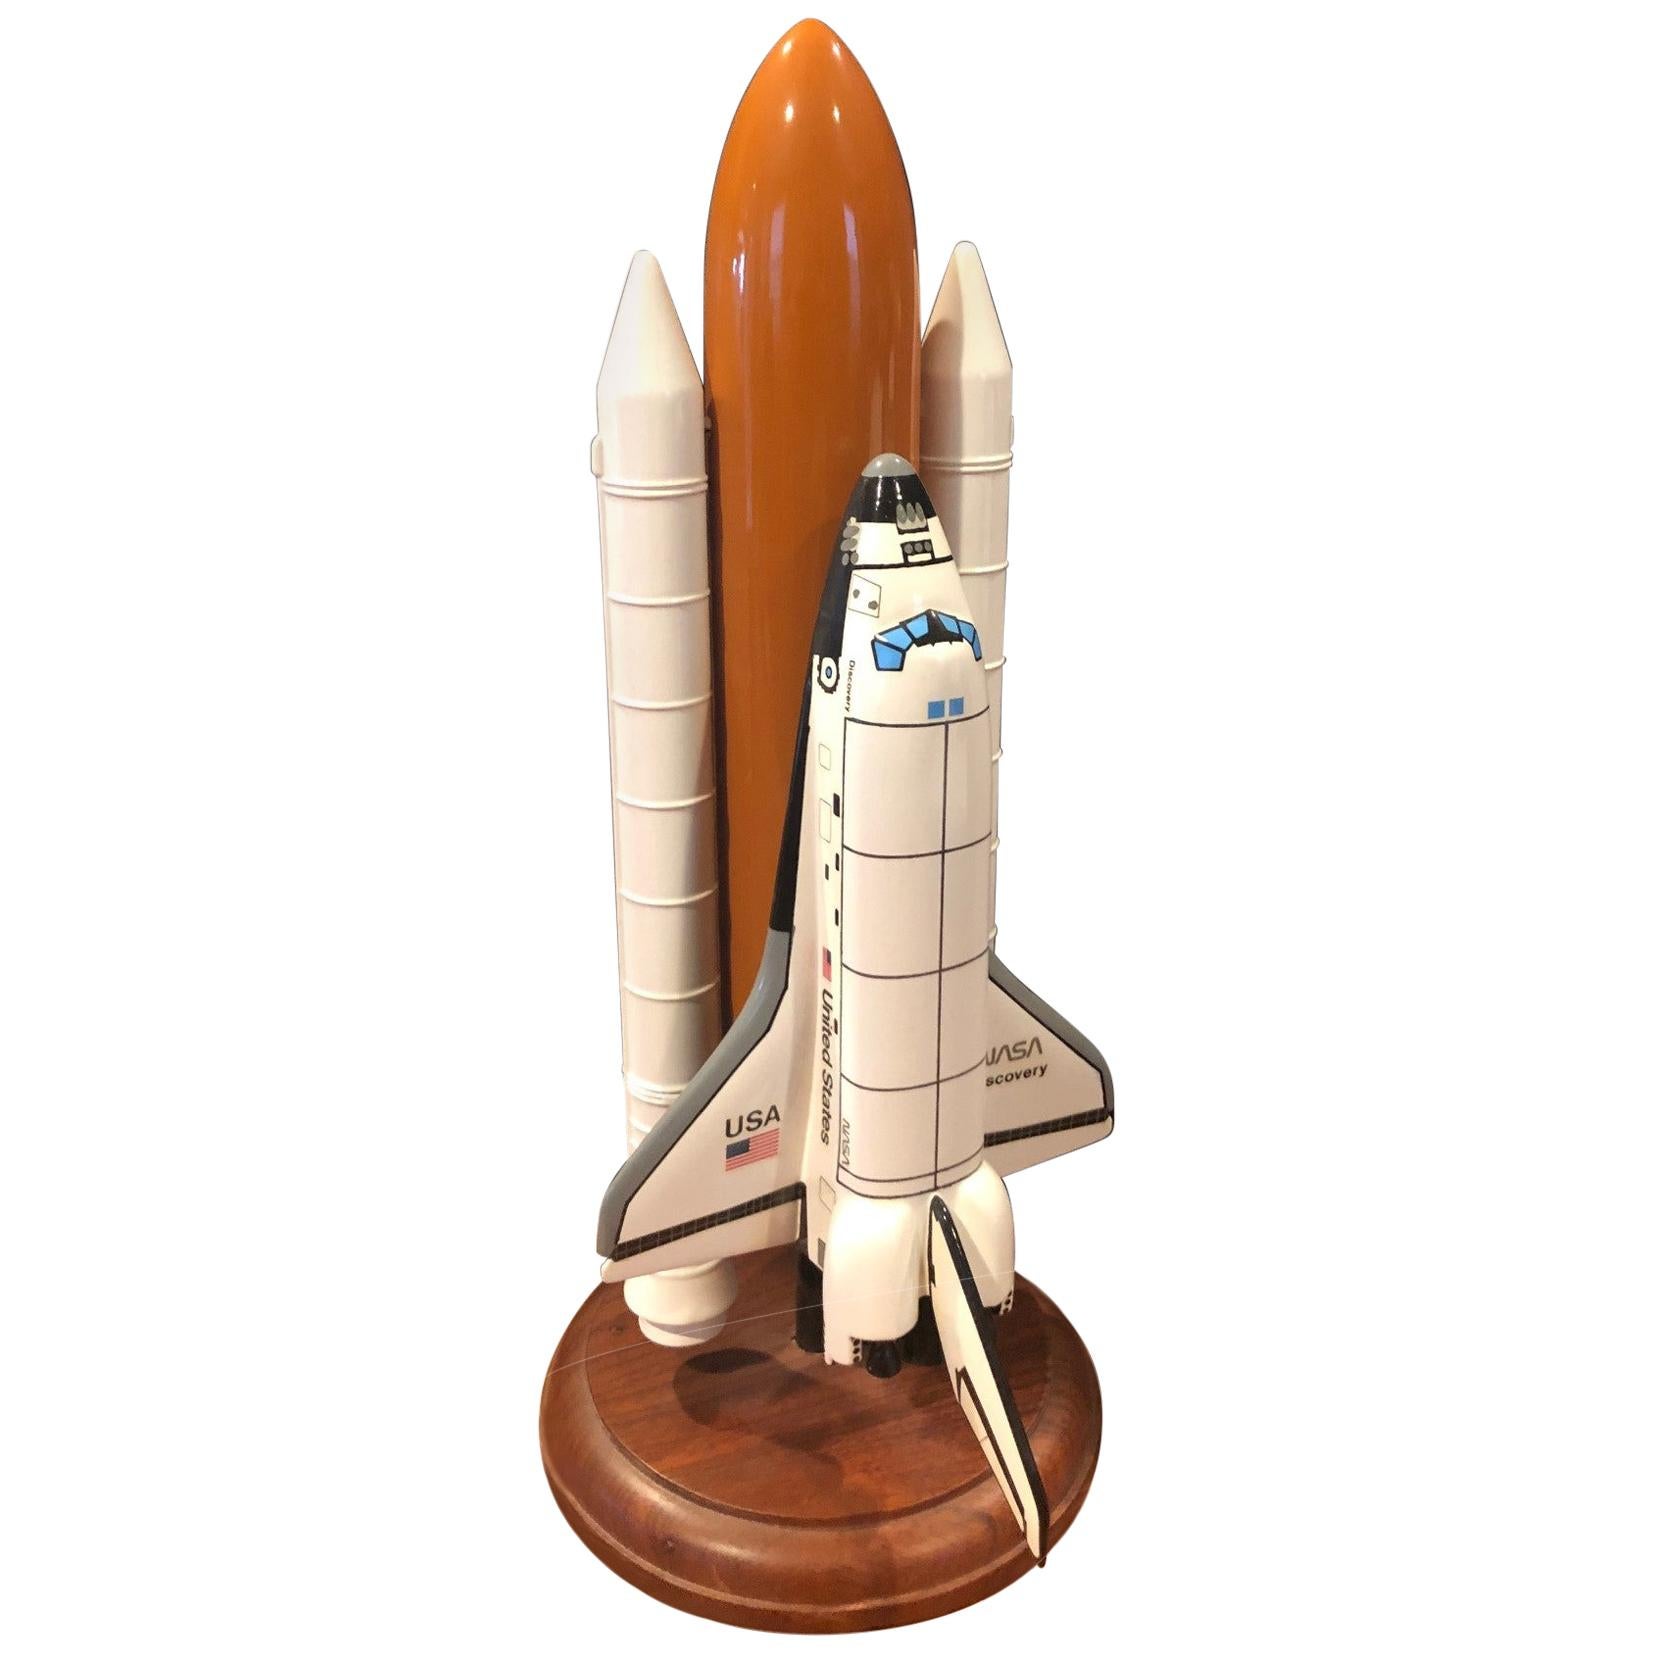 NASA Space Shuttle Discovery Contractor Desk Model 1/200 Scale